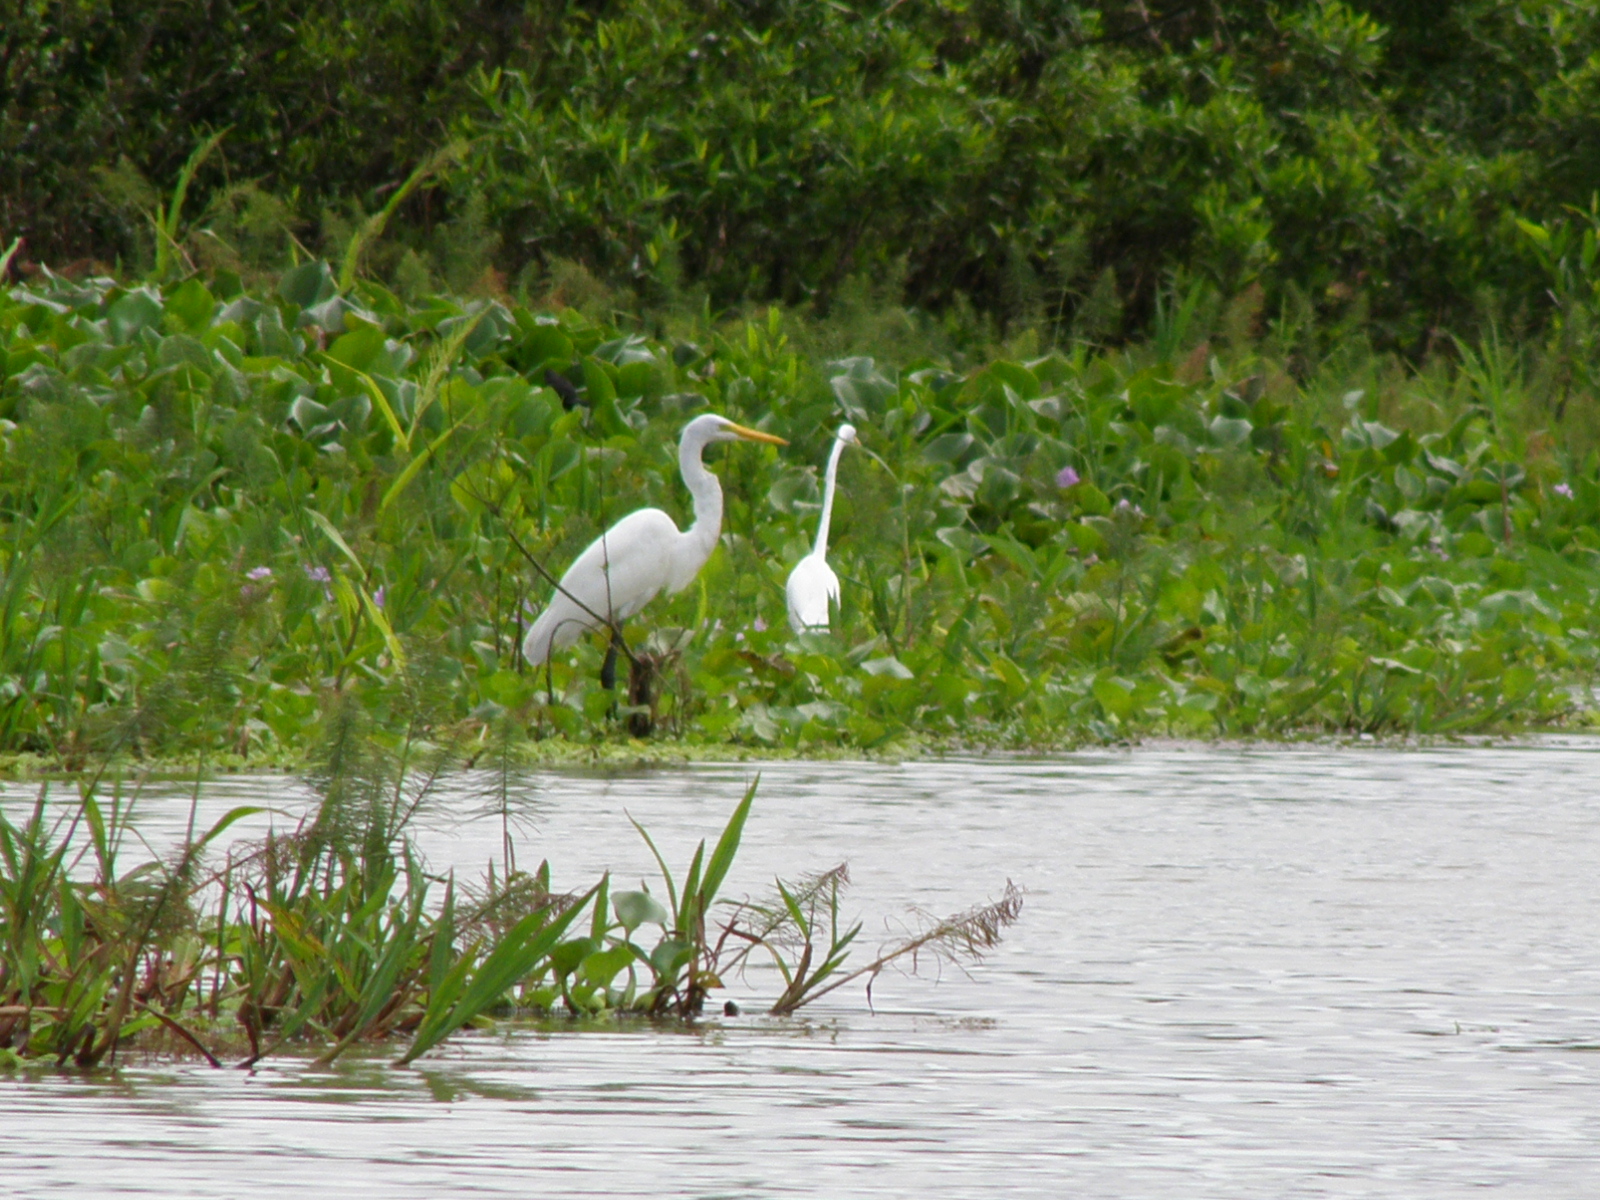 two herons in a field by some water